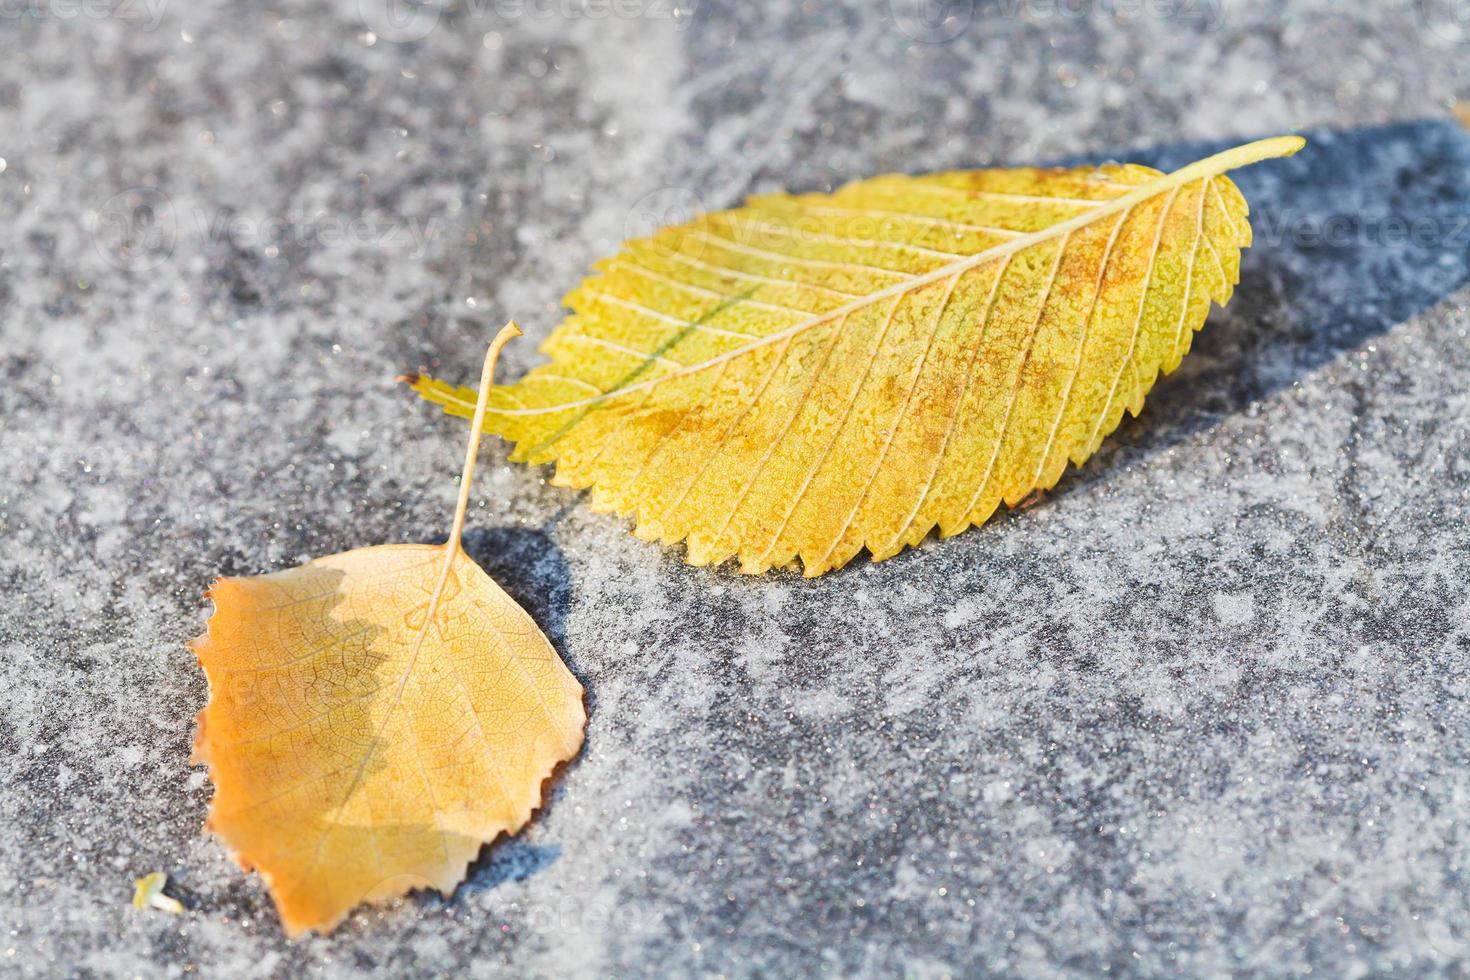 first frosts and fallen birch leaves photo